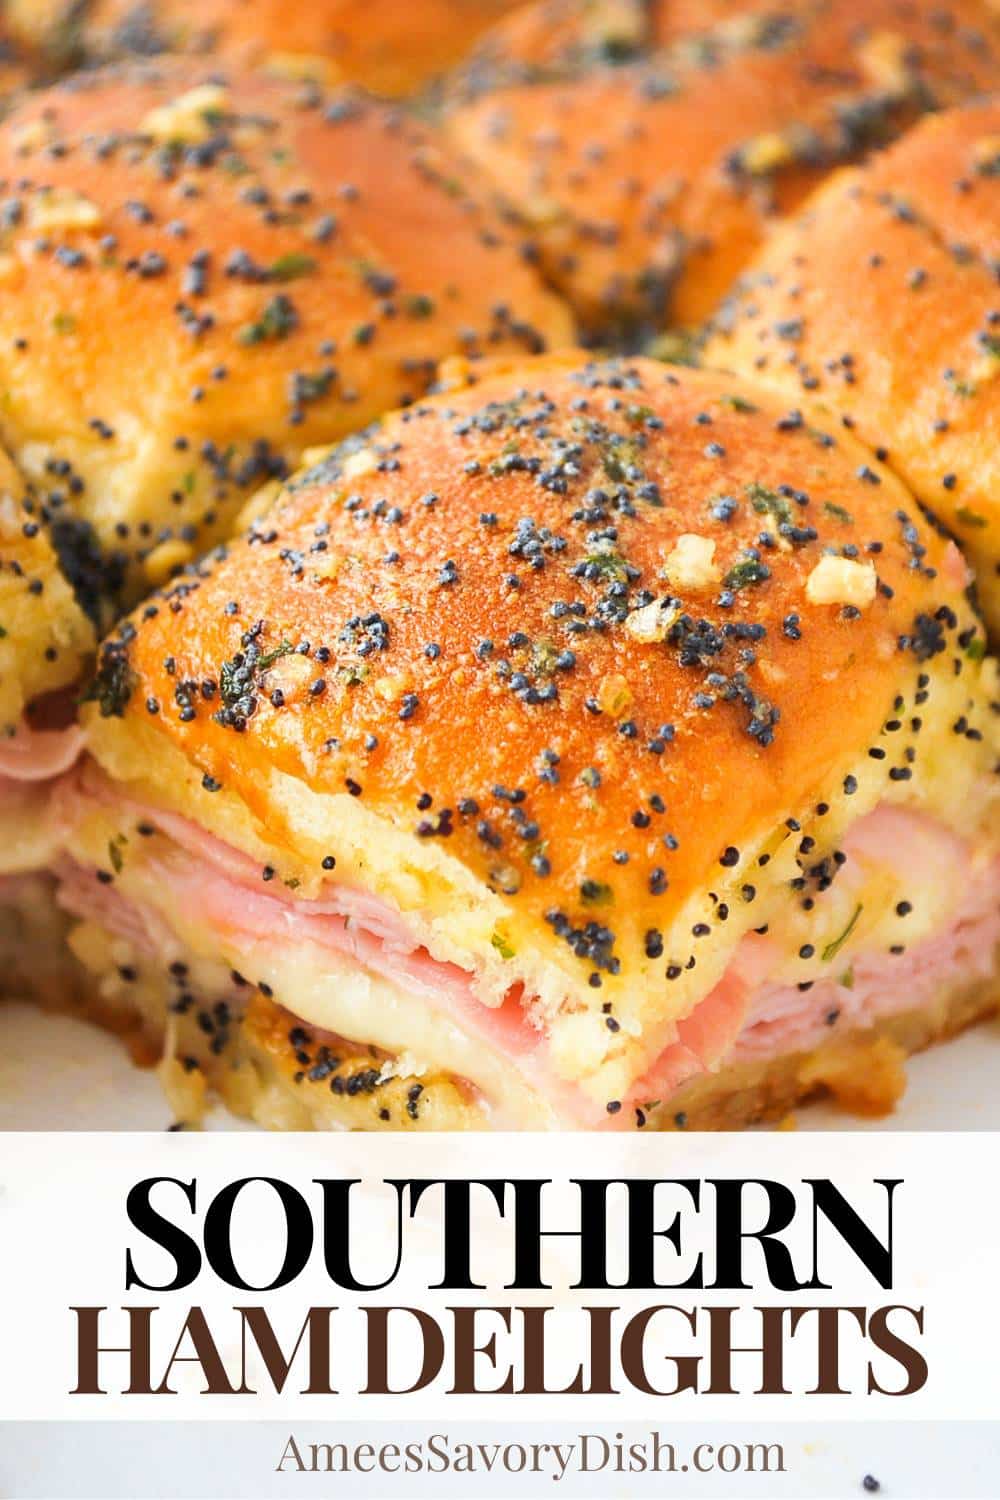 These insanely delicious mini ham and cheese sammies deliver a blast of sweet, salty, buttery, cheesy, meaty, and savory flavor in every single ooey-gooey bite! A southern party favorite! via @Ameessavorydish